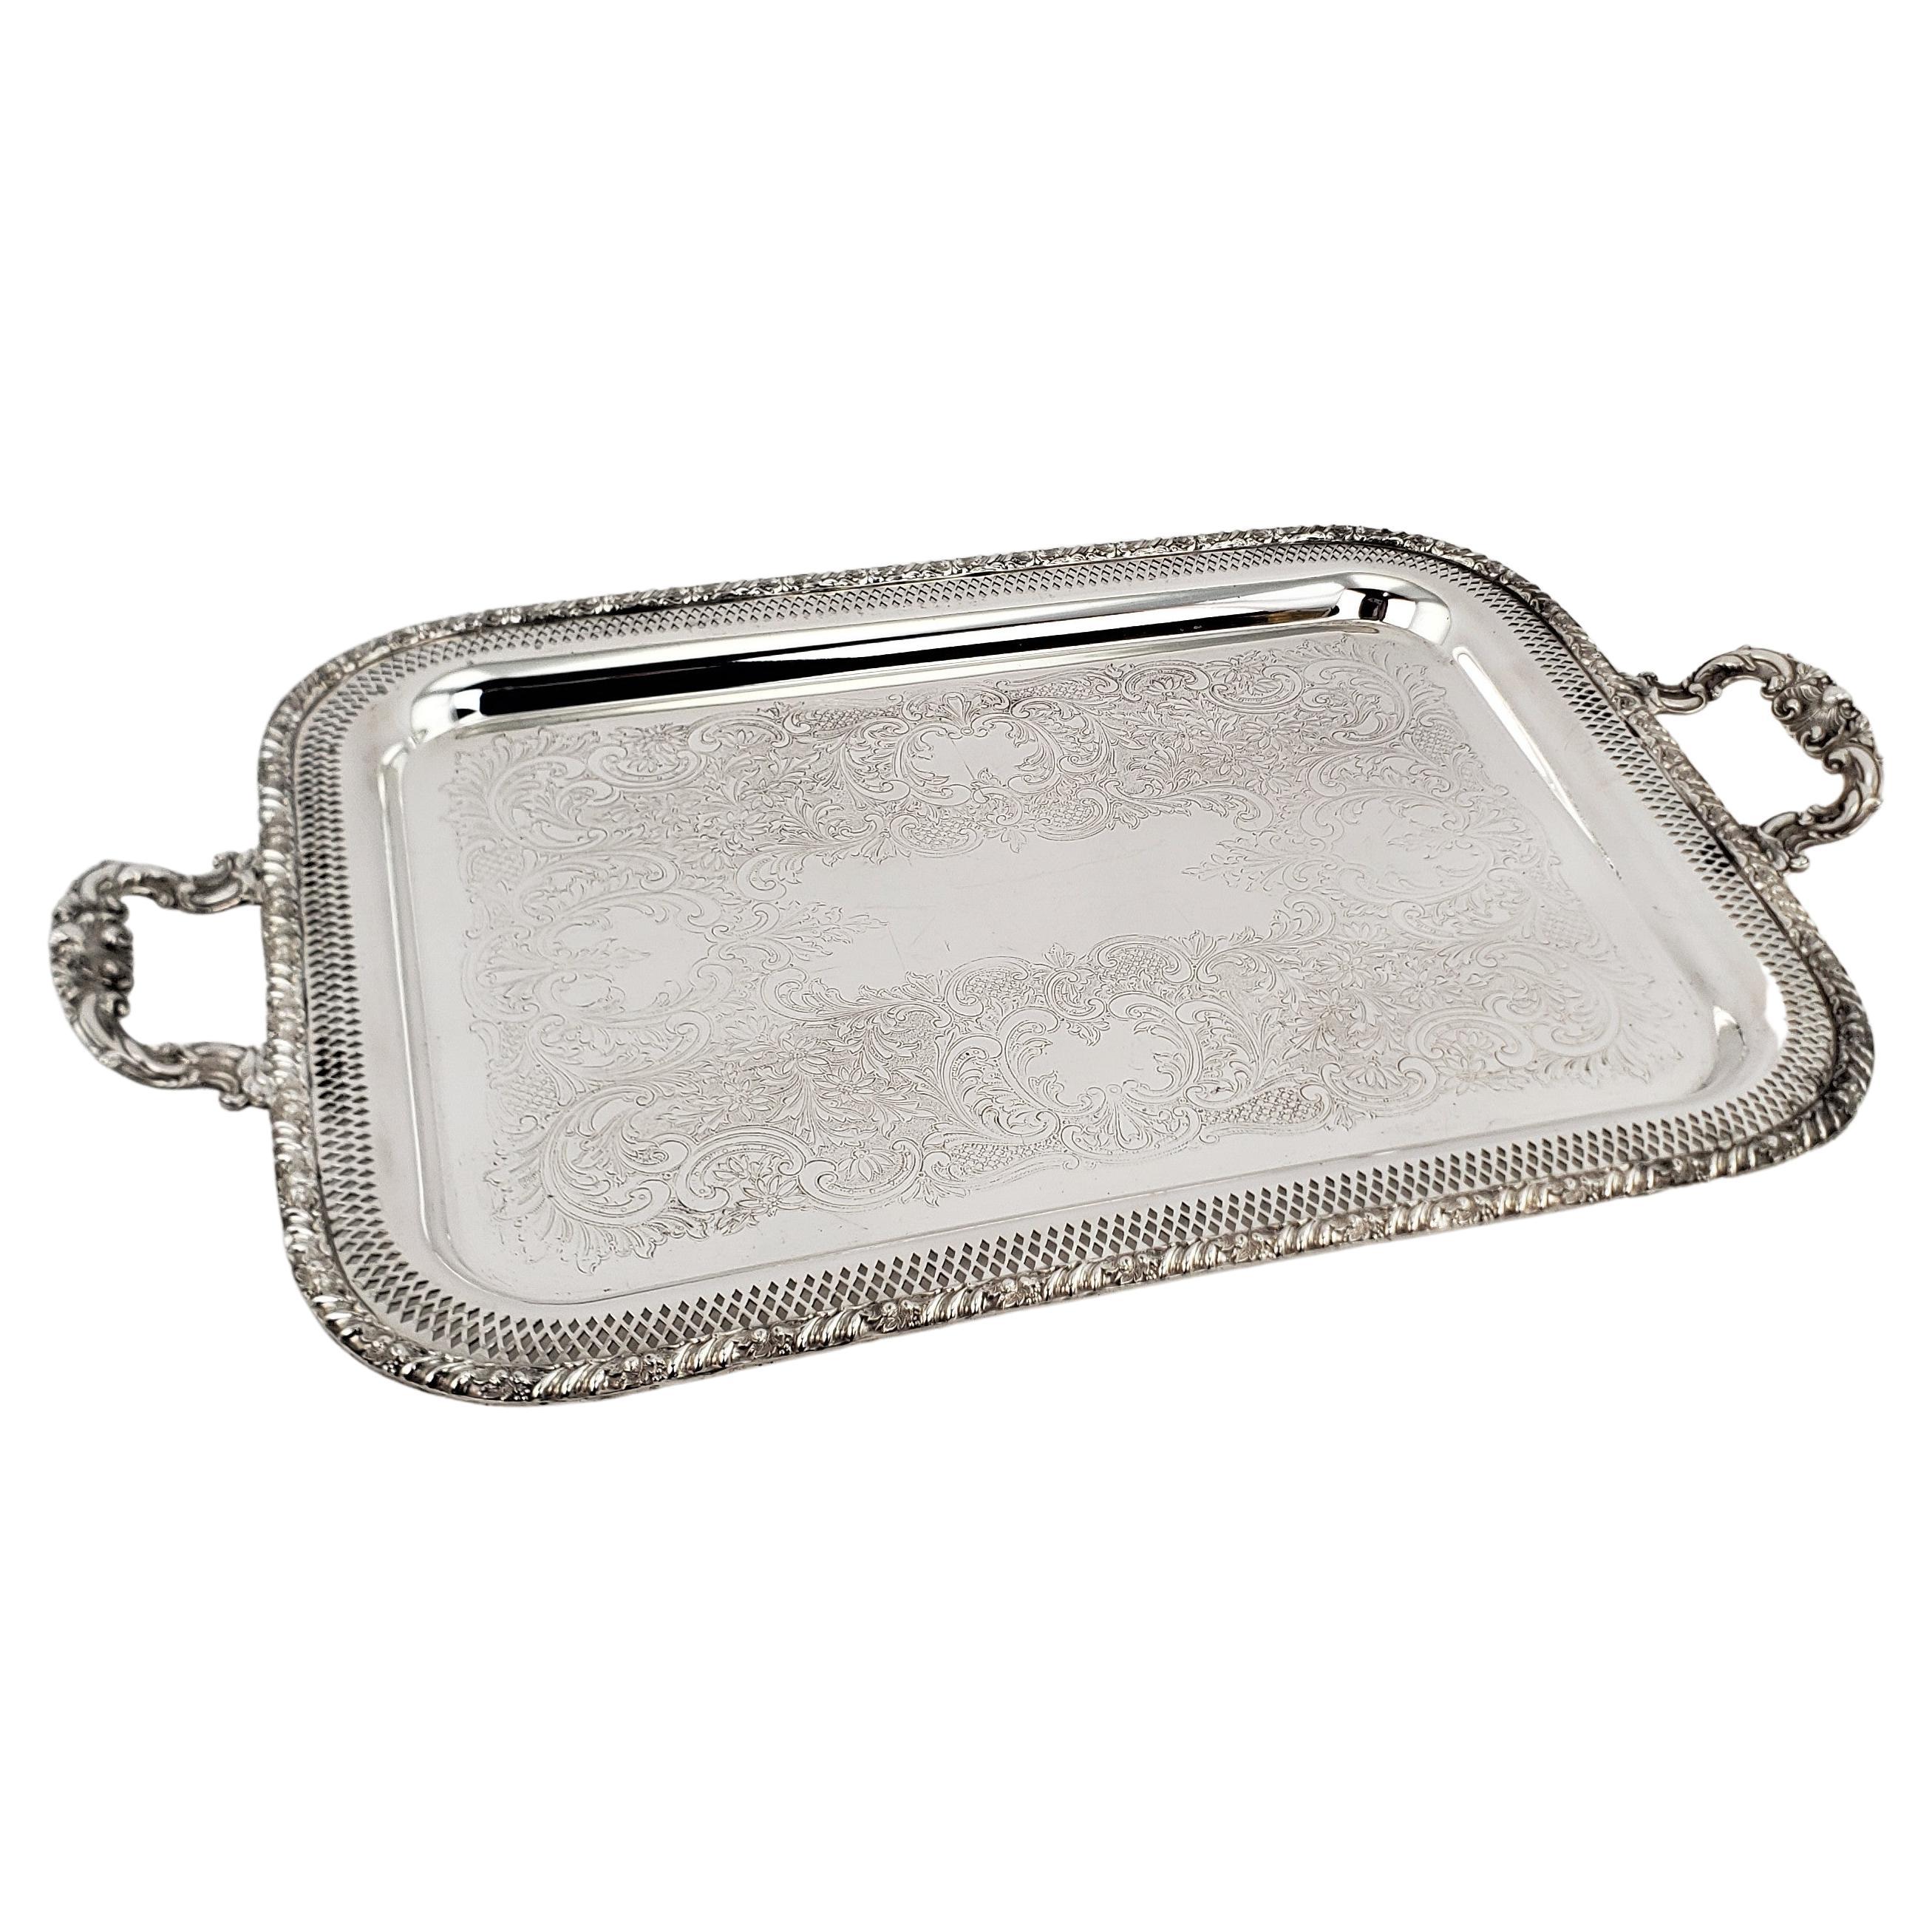 Antique Sheffield Reproduction Silver Plated Serving Tray with Pierced Surround